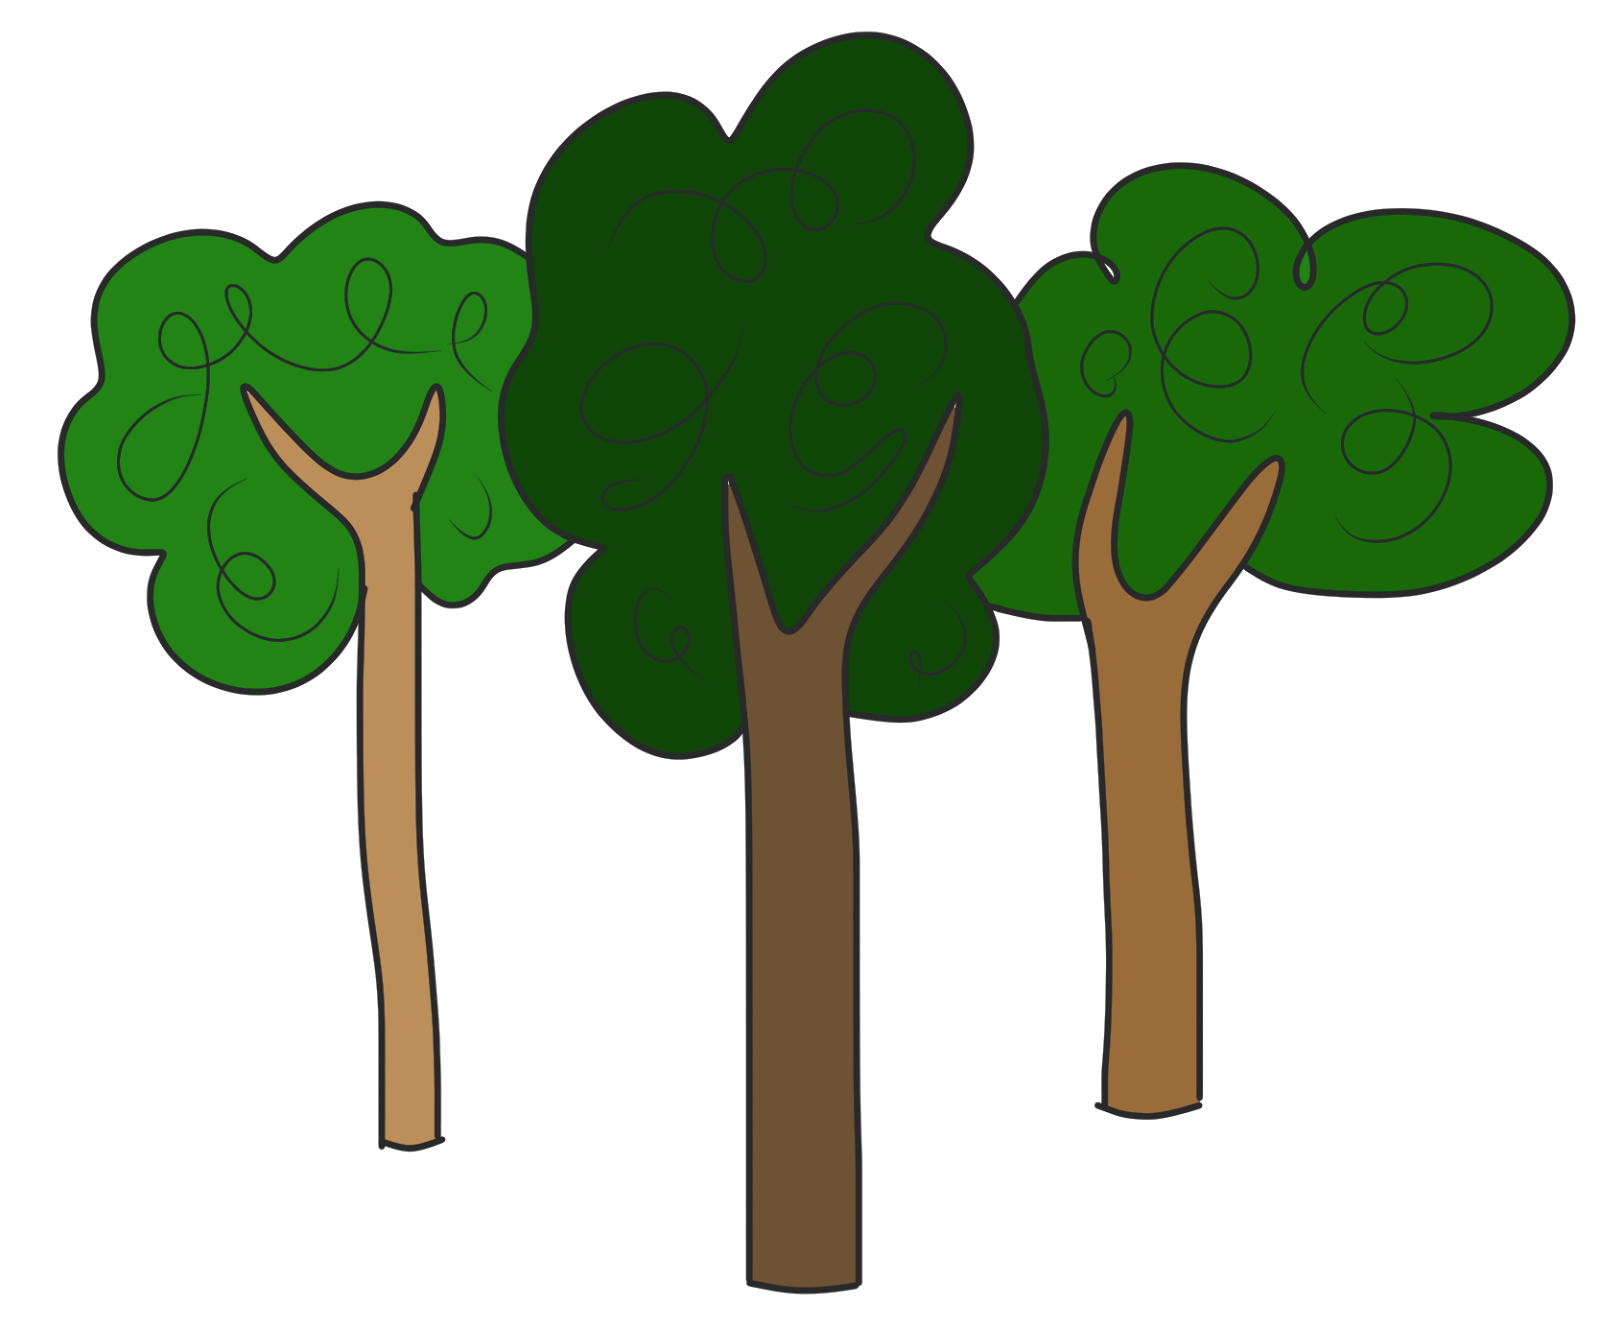 clipart images of a tree - photo #10